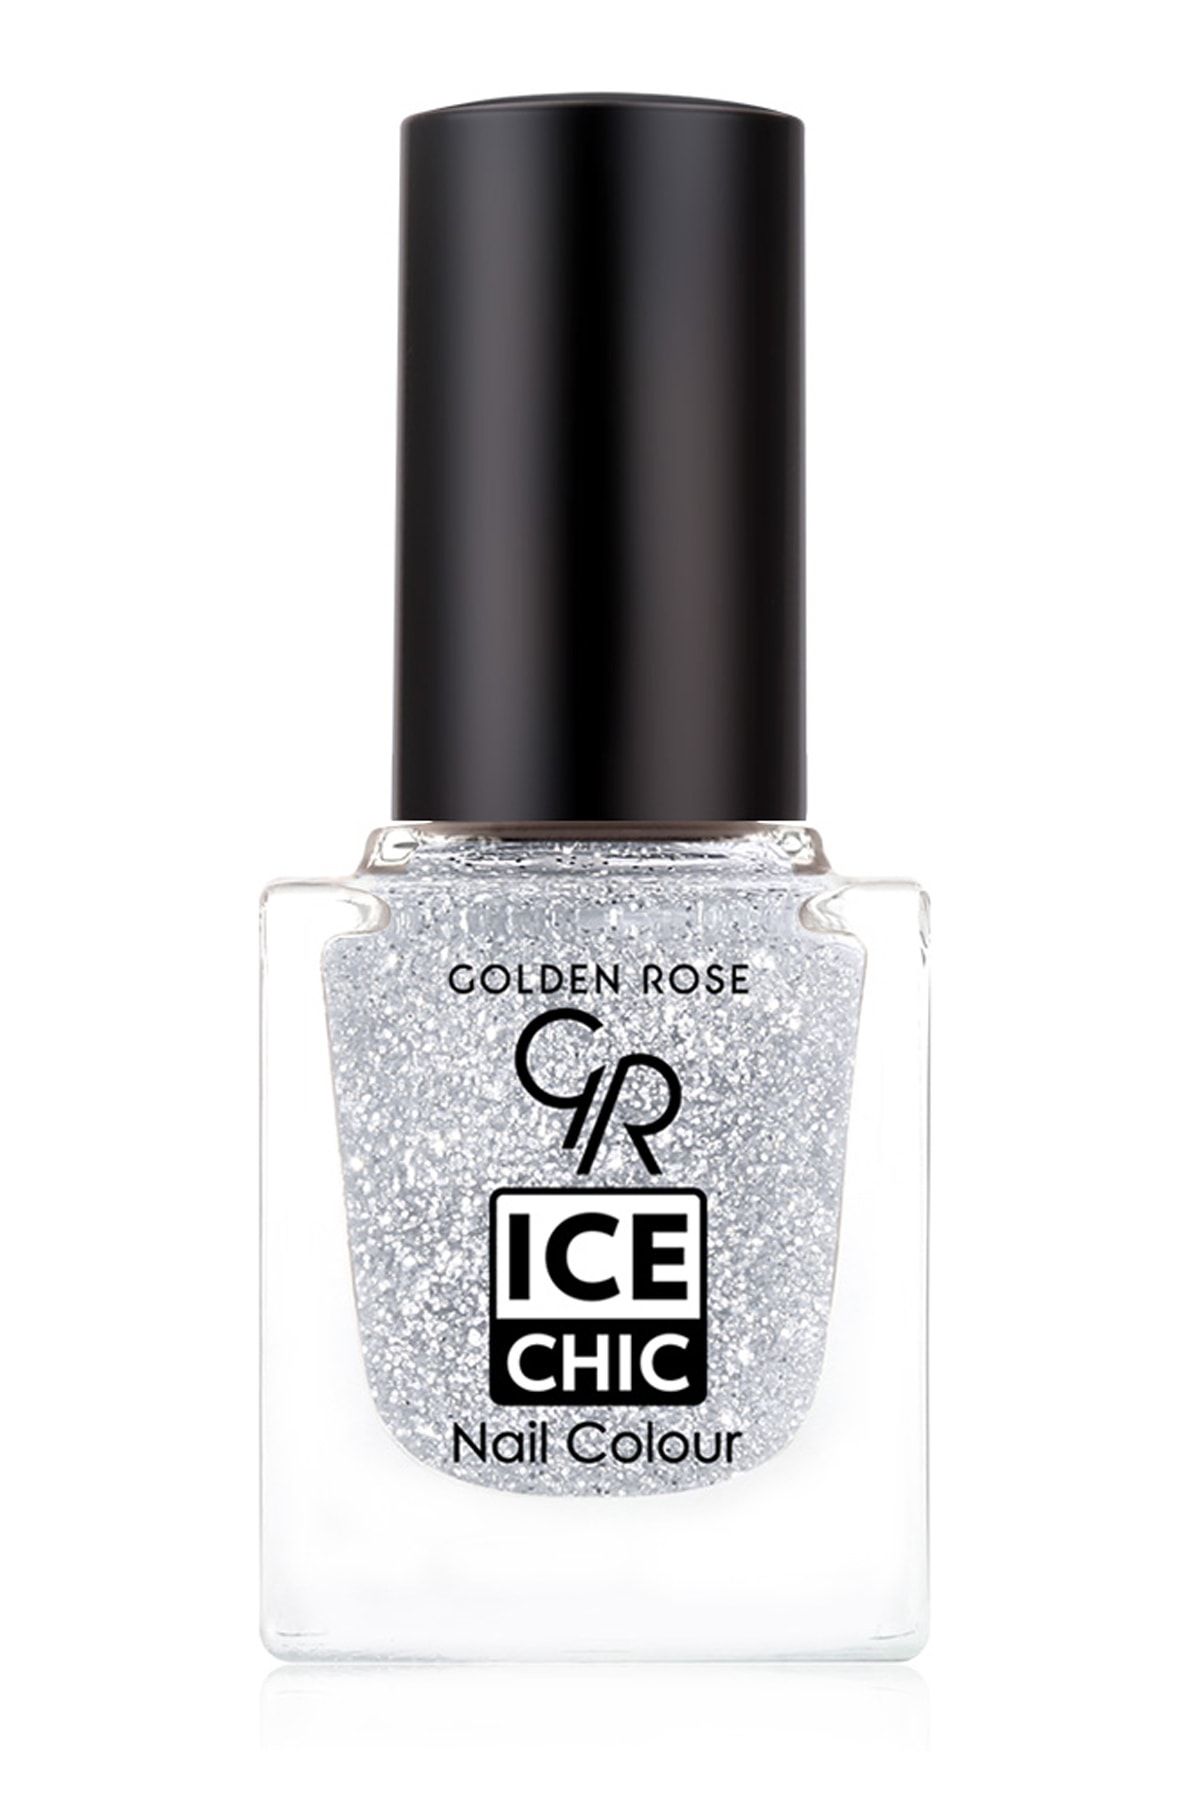 Golden Rose Oje - Ice Chic Nail Colour No: 101 8691190861018